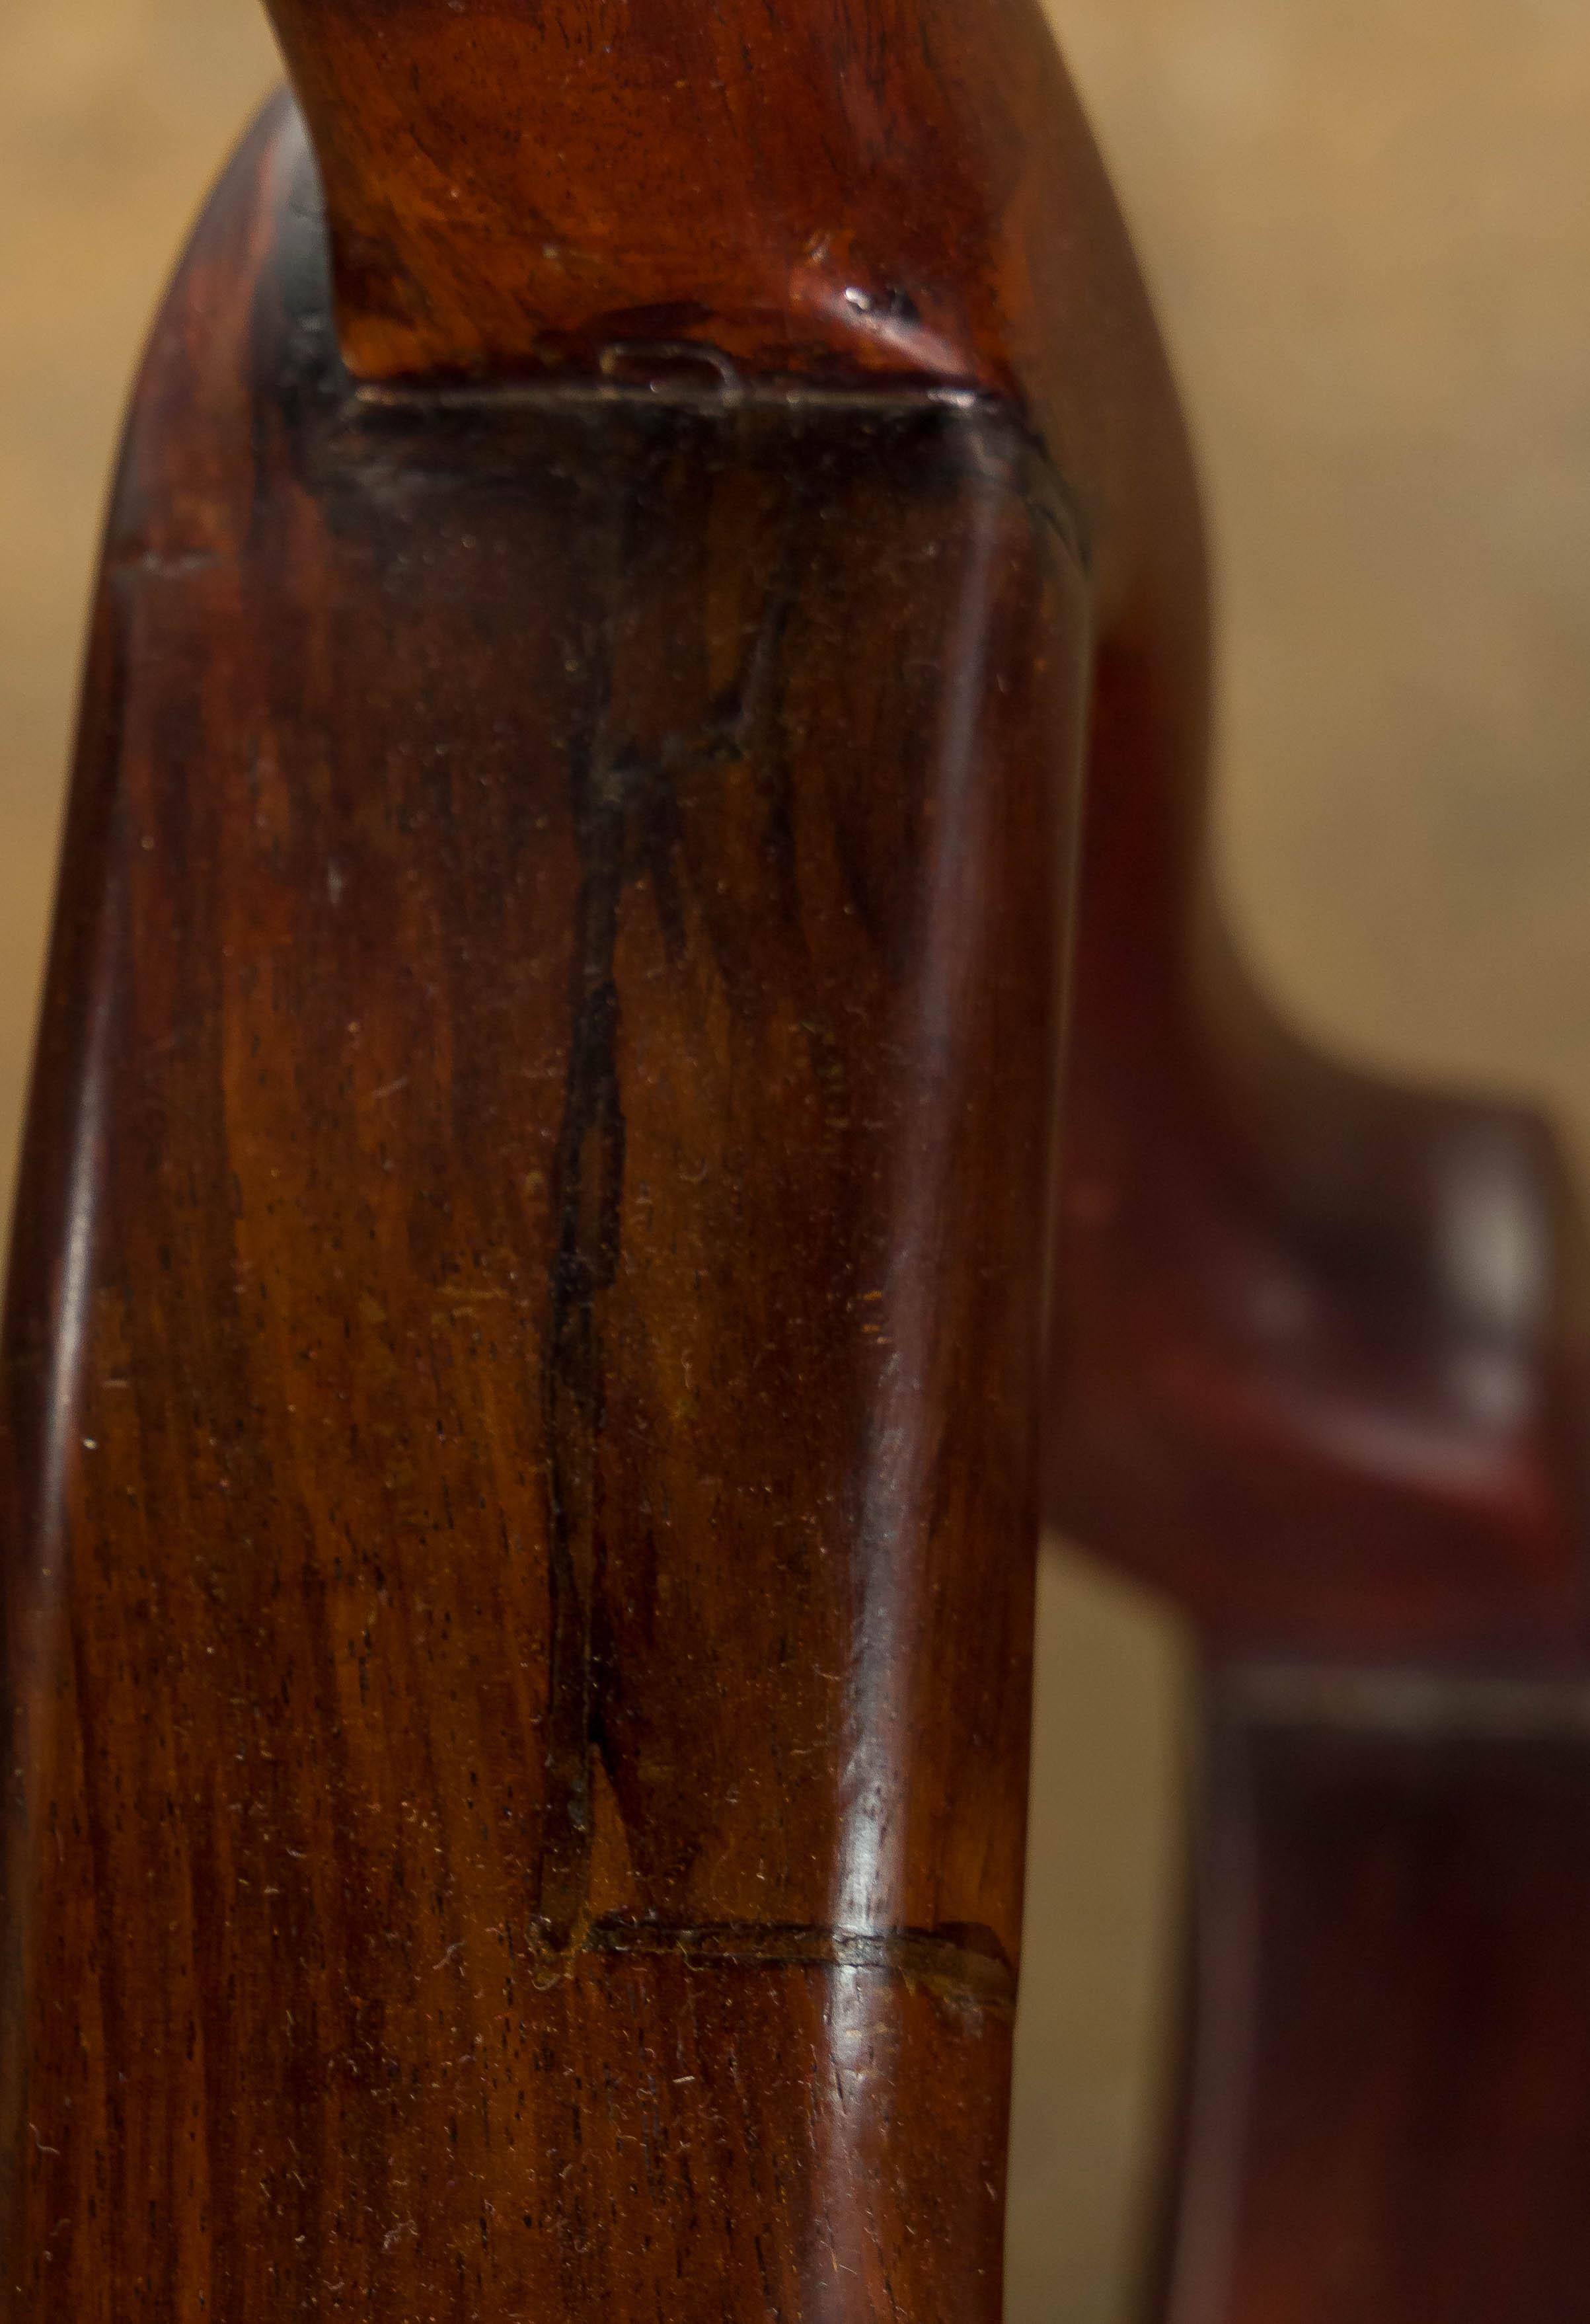 Chinese Rosewood Armchairs